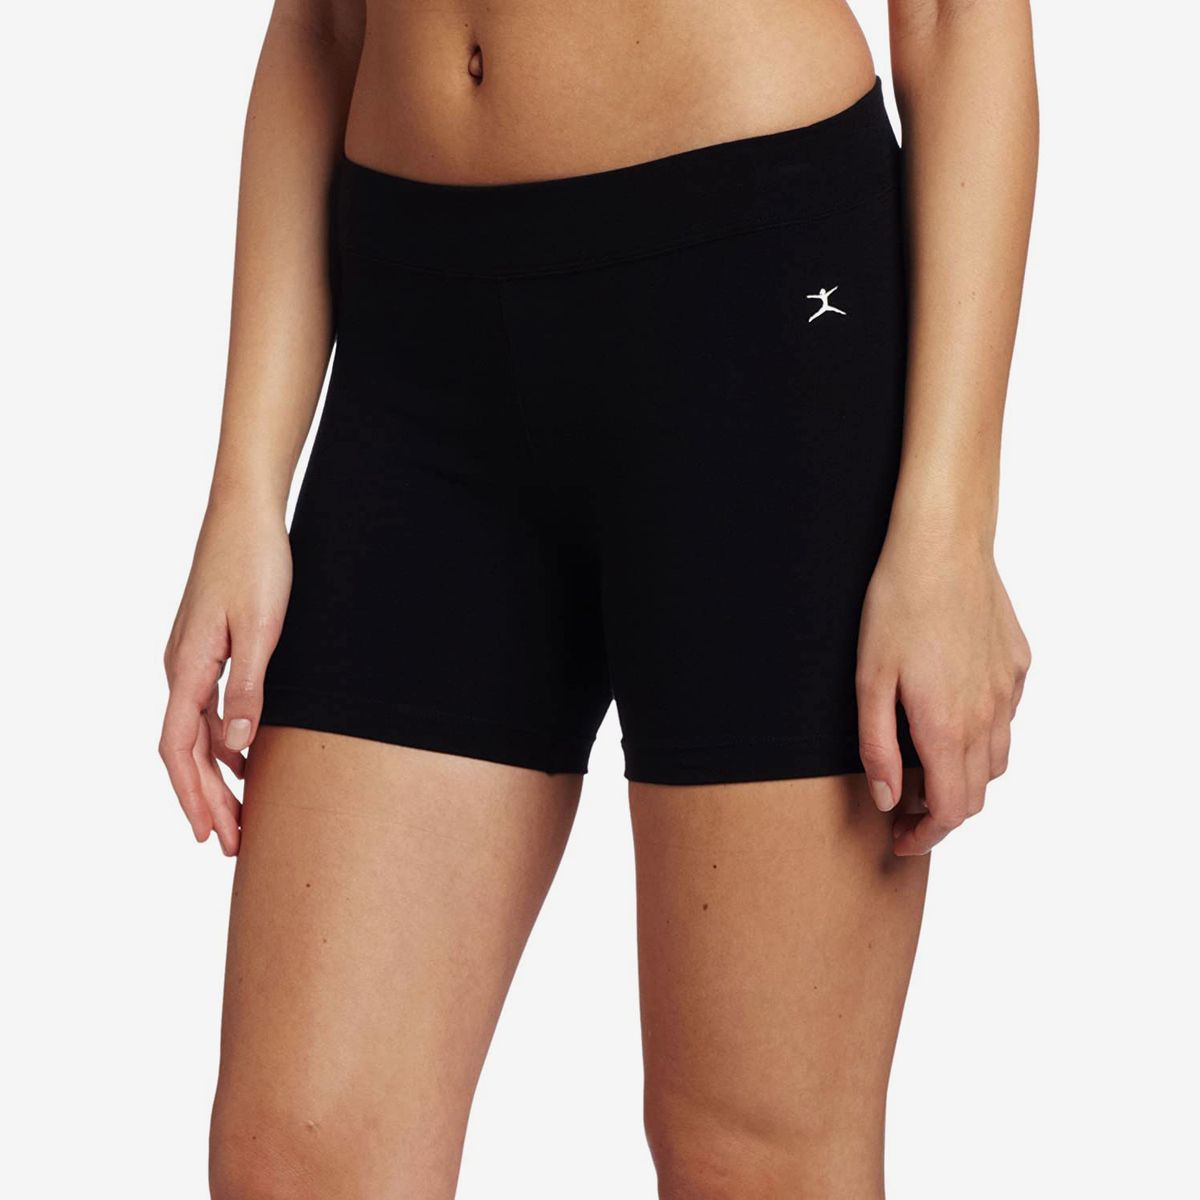 most comfortable bike shorts for long rides